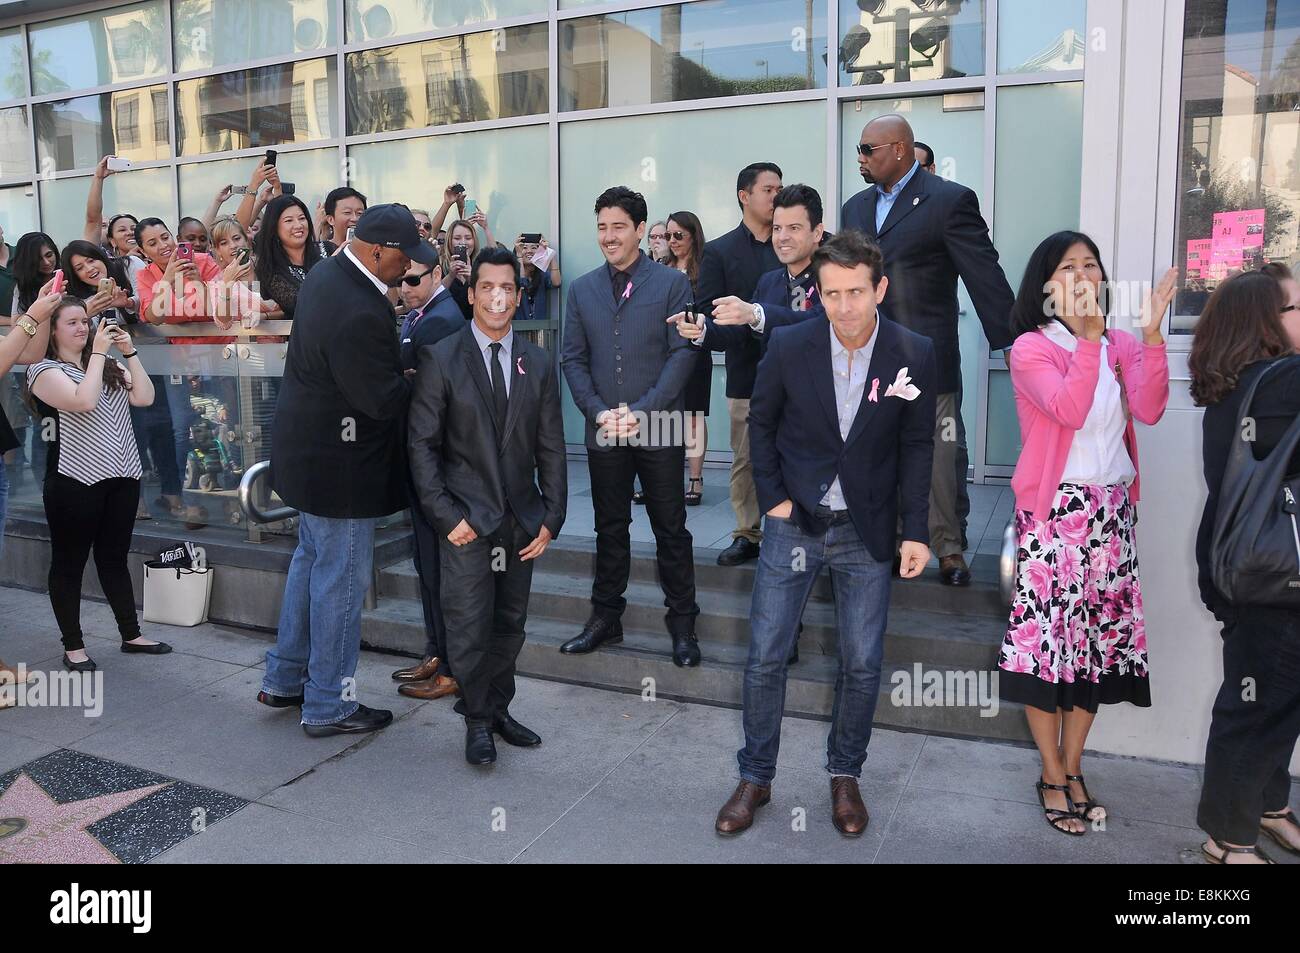 Los Angeles, CA, USA. 9th Oct, 2014. Danny Wood, Jonathan Knight, Jordan Knight, Joey McIntyre at the induction ceremony for Star on the Hollywood Walk of Fame for NEW KIDS ON THE BLOCK, Hollywood Boulevard, Los Angeles, CA October 9, 2014. Credit:  Michael Germana/Everett Collection/Alamy Live News Stock Photo